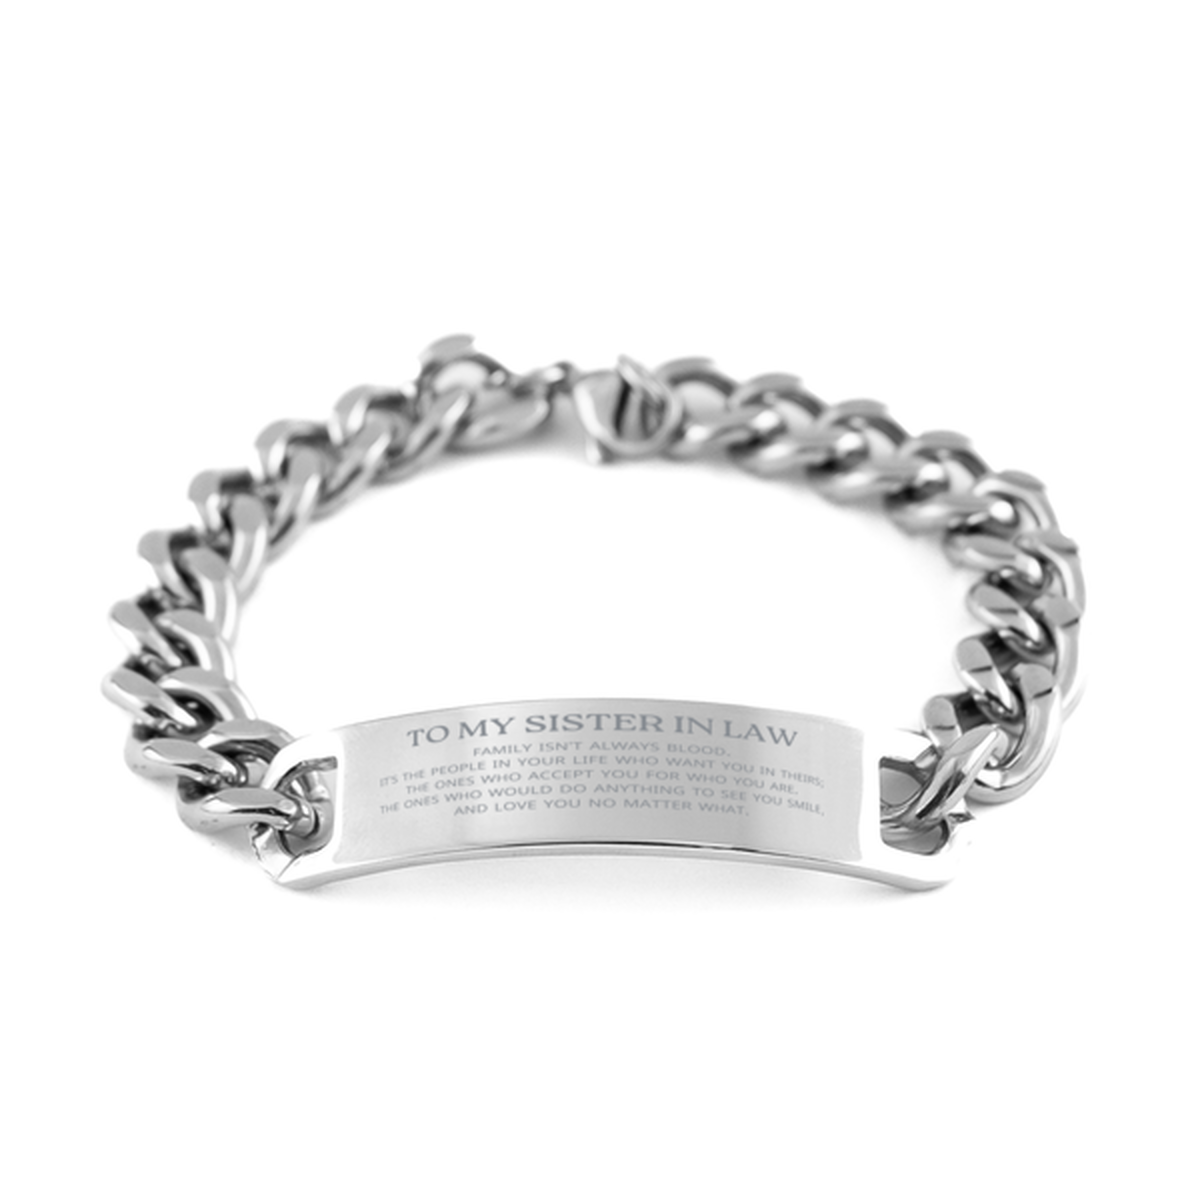 To My Sister In Law Gifts, Family isn't always blood, Sister In Law Cuban Chain Stainless Steel Bracelet, Birthday Christmas Unique Present For Sister In Law